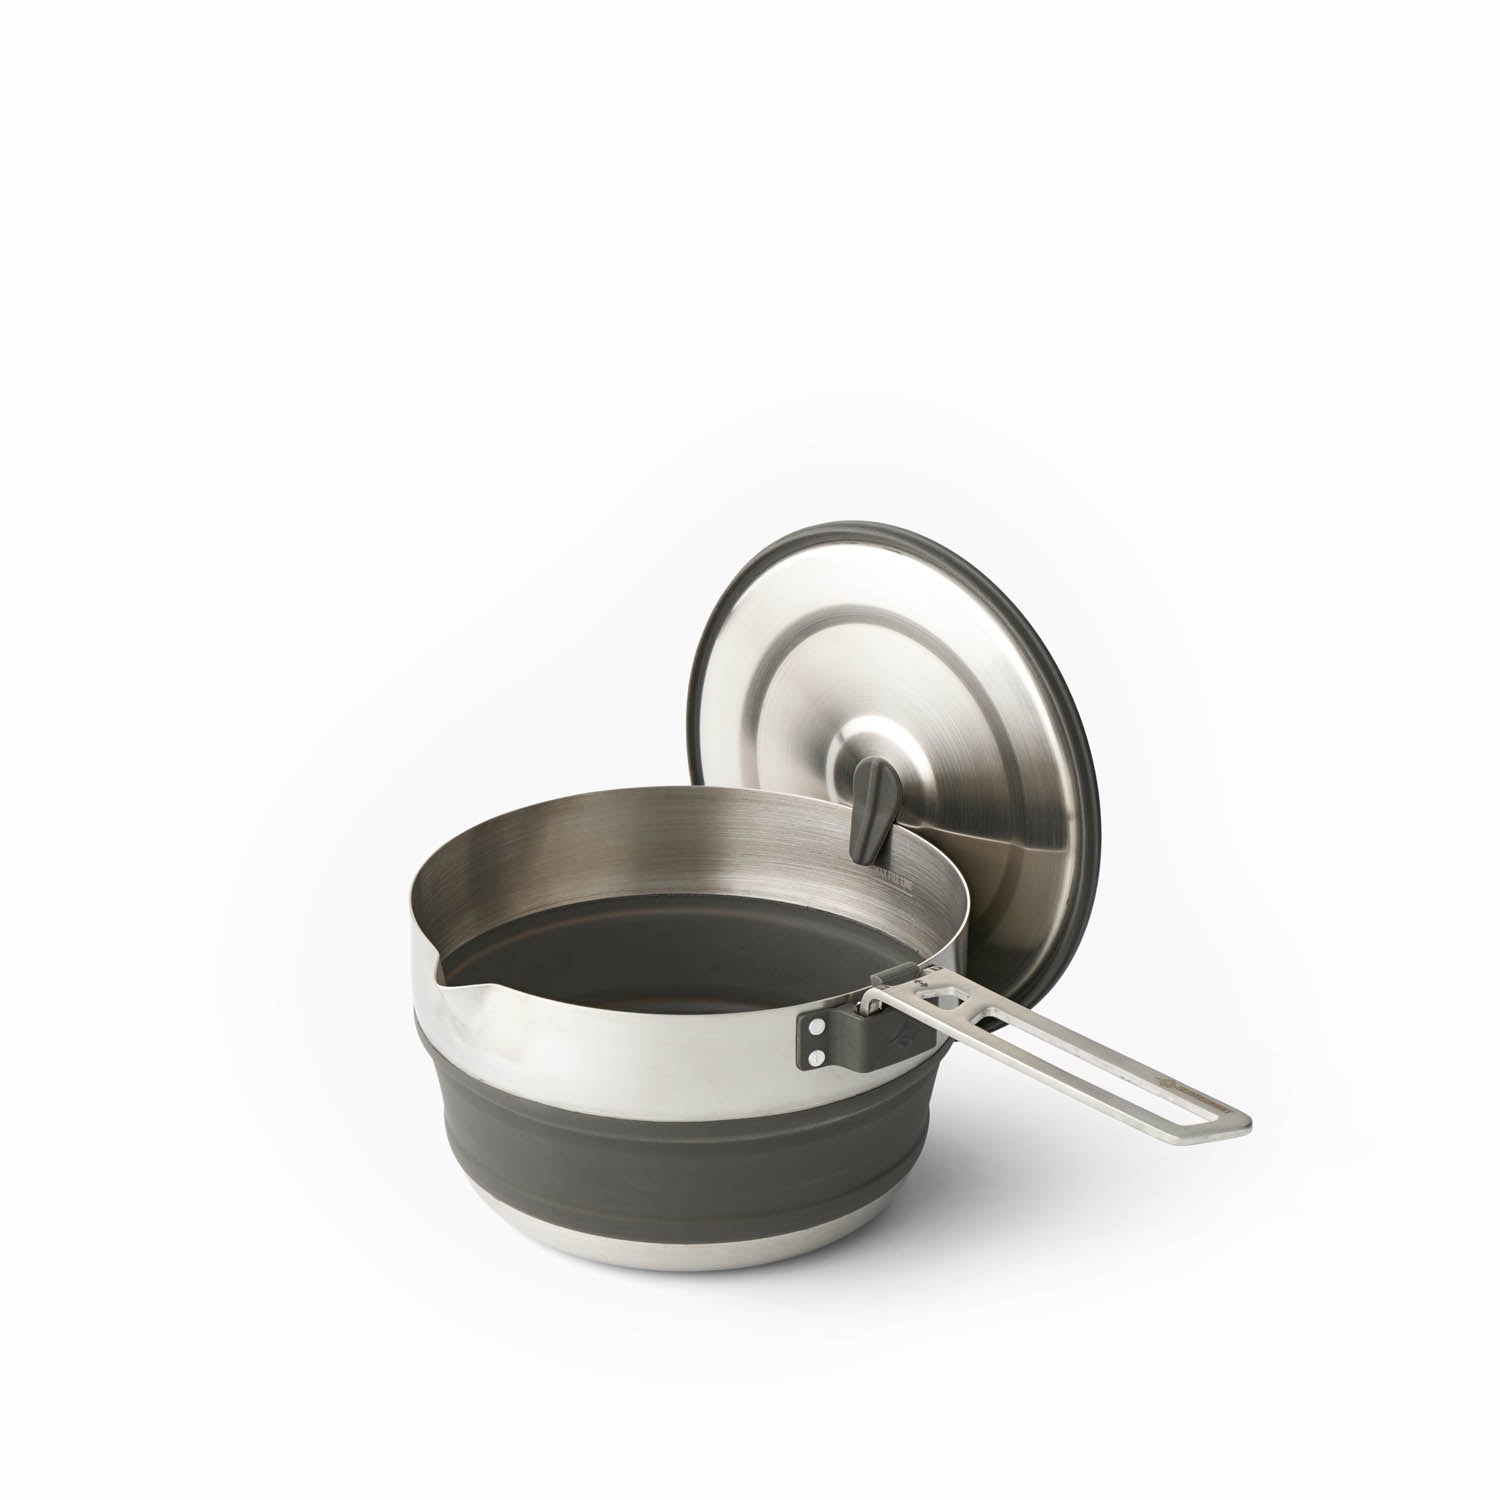 Popote à verser pliable Detour Stainless Steel Collapsible Pouring Pot